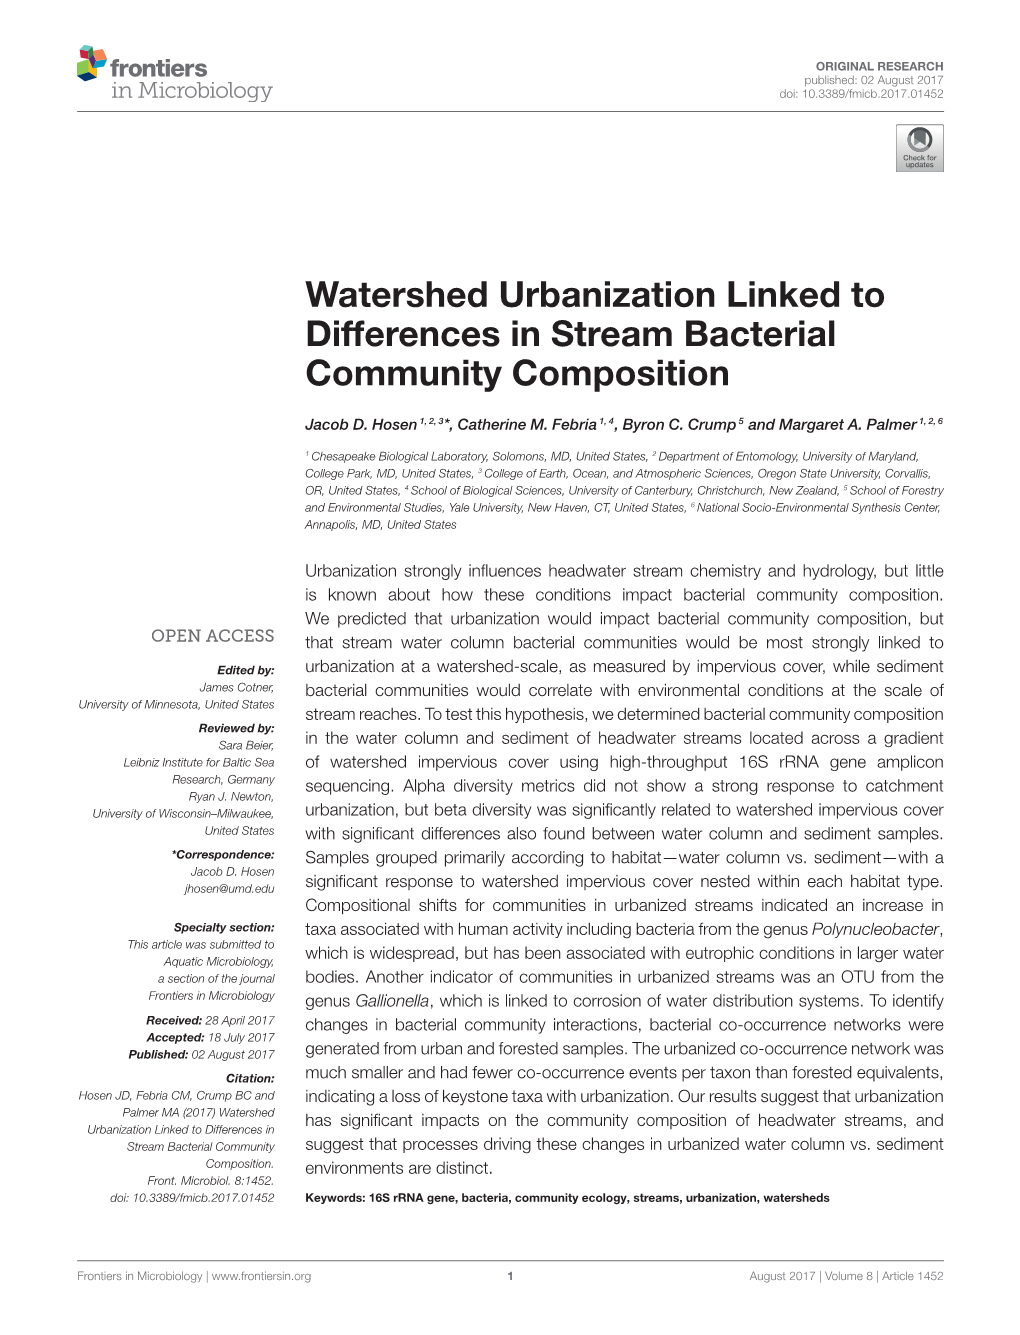 Watershed Urbanization Linked to Differences in Stream Bacterial Community Composition